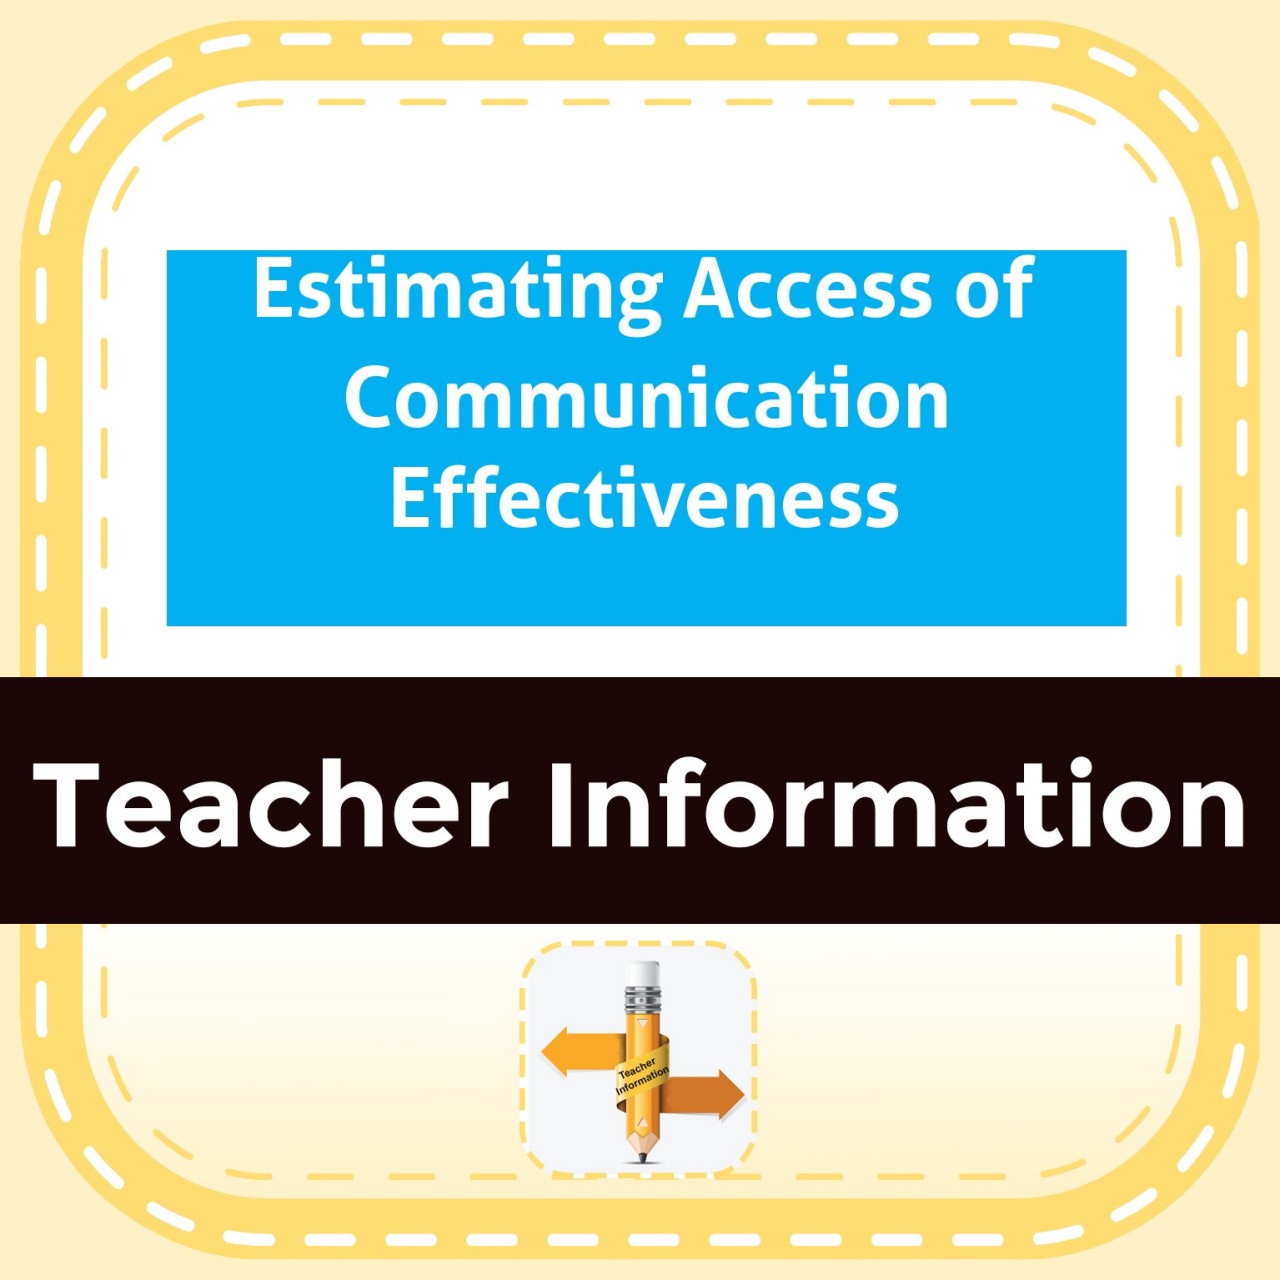 Estimating Access of Communication Effectiveness